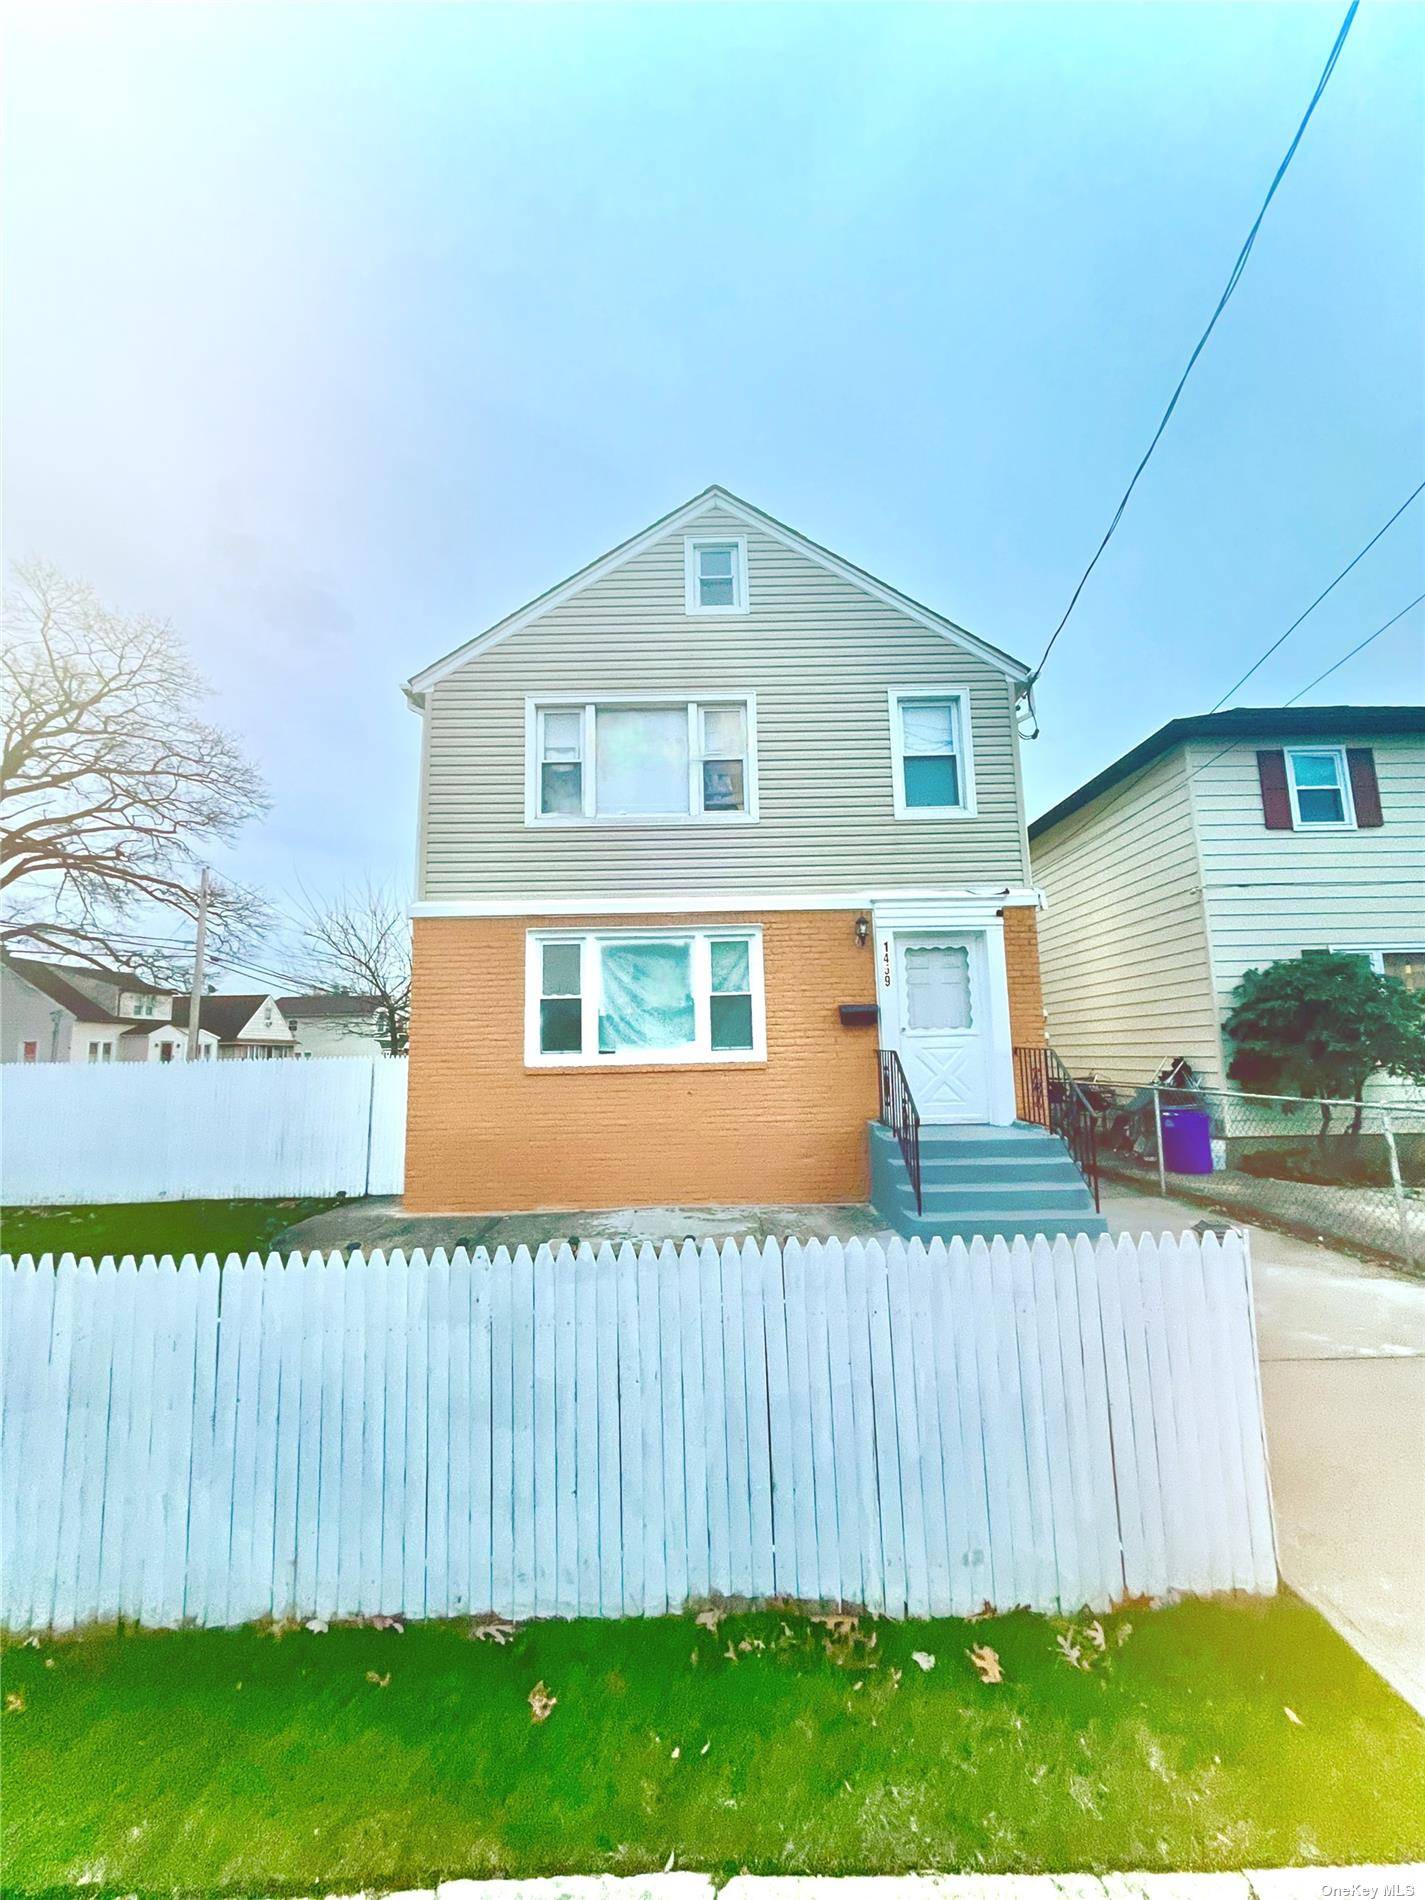 Welcome to this Beautifully Renovated 2 Family corner property in Elmont.